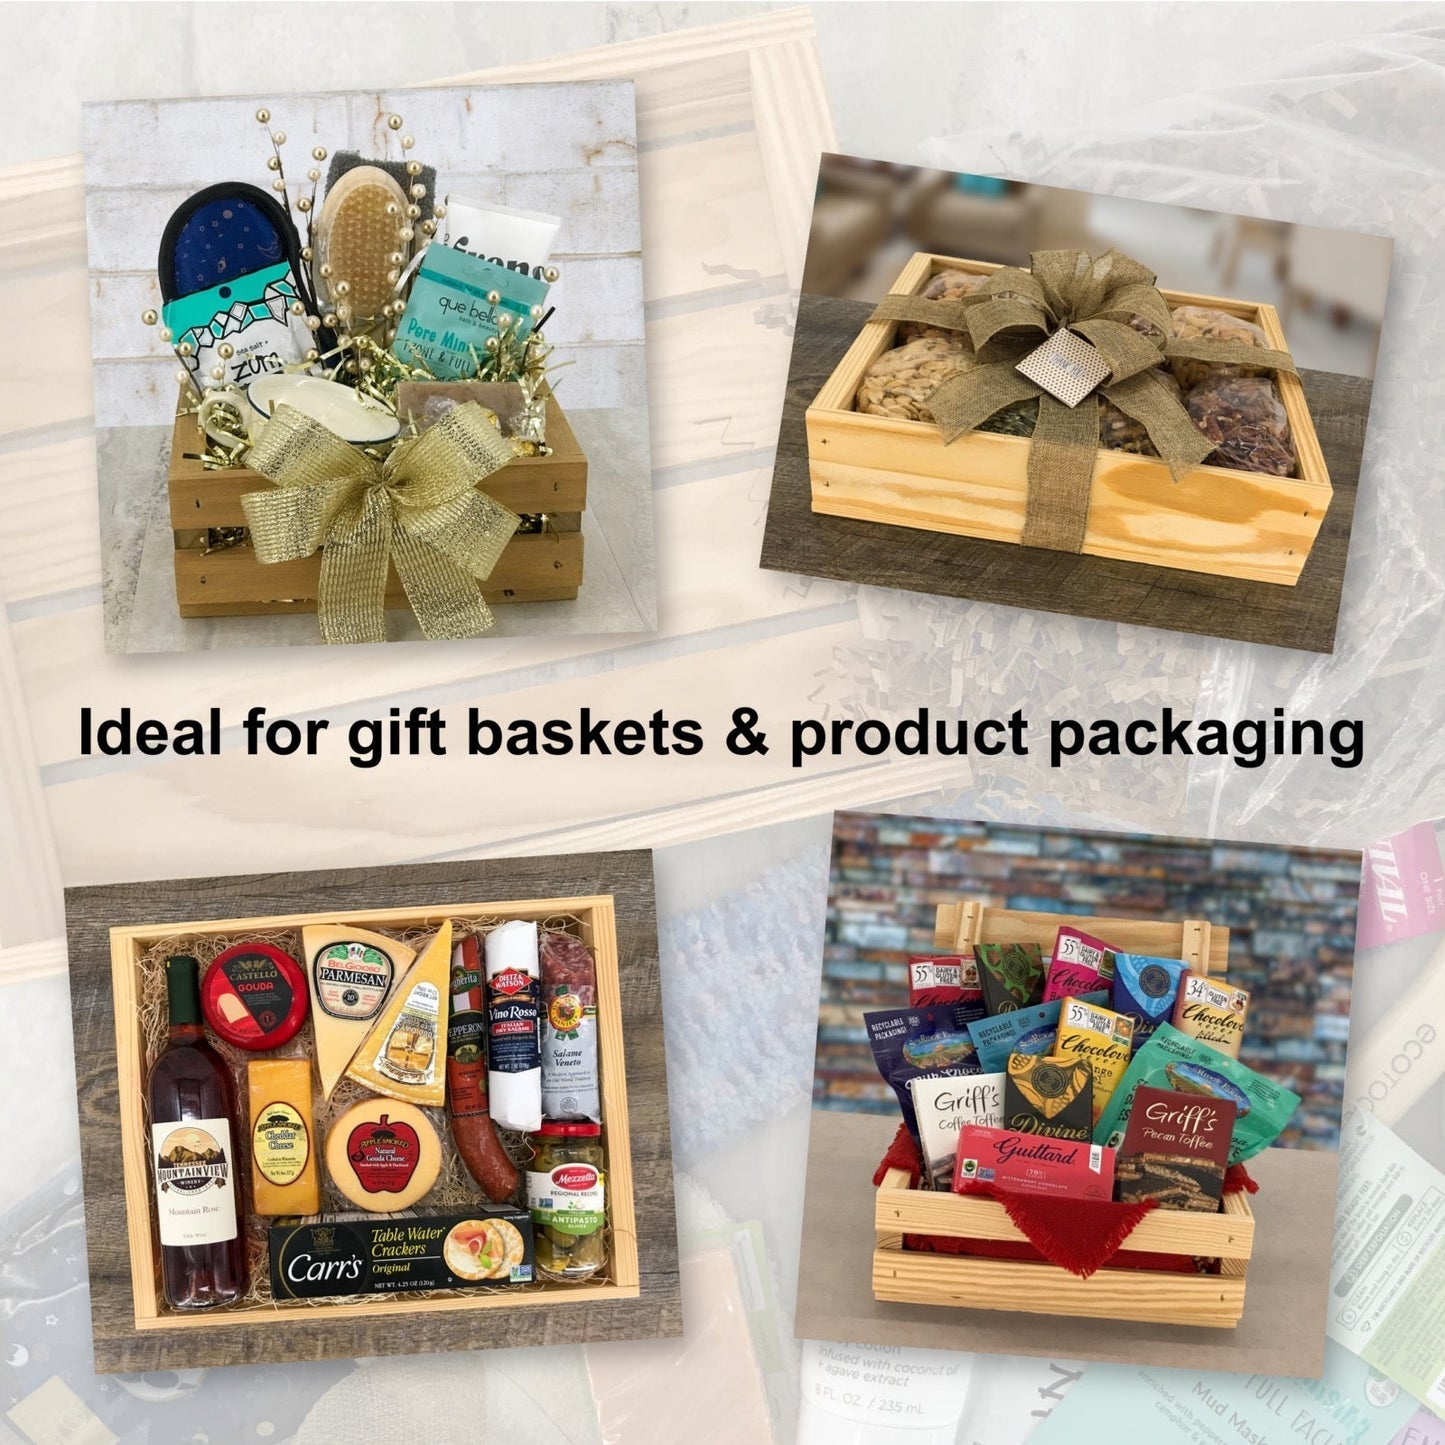 Ideal for gift baskets and product packaging, S2-10.375-8.5625-3.5-ST-NW-NL, 6-S2-10.375-8.5625-3.5-ST-NW-NL, 12-S2-10.375-8.5625-3.5-ST-NW-NL, 24-S2-10.375-8.5625-3.5-ST-NW-NL, 48-S2-10.375-8.5625-3.5-ST-NW-NL, 96-S2-10.375-8.5625-3.5-ST-NW-NL